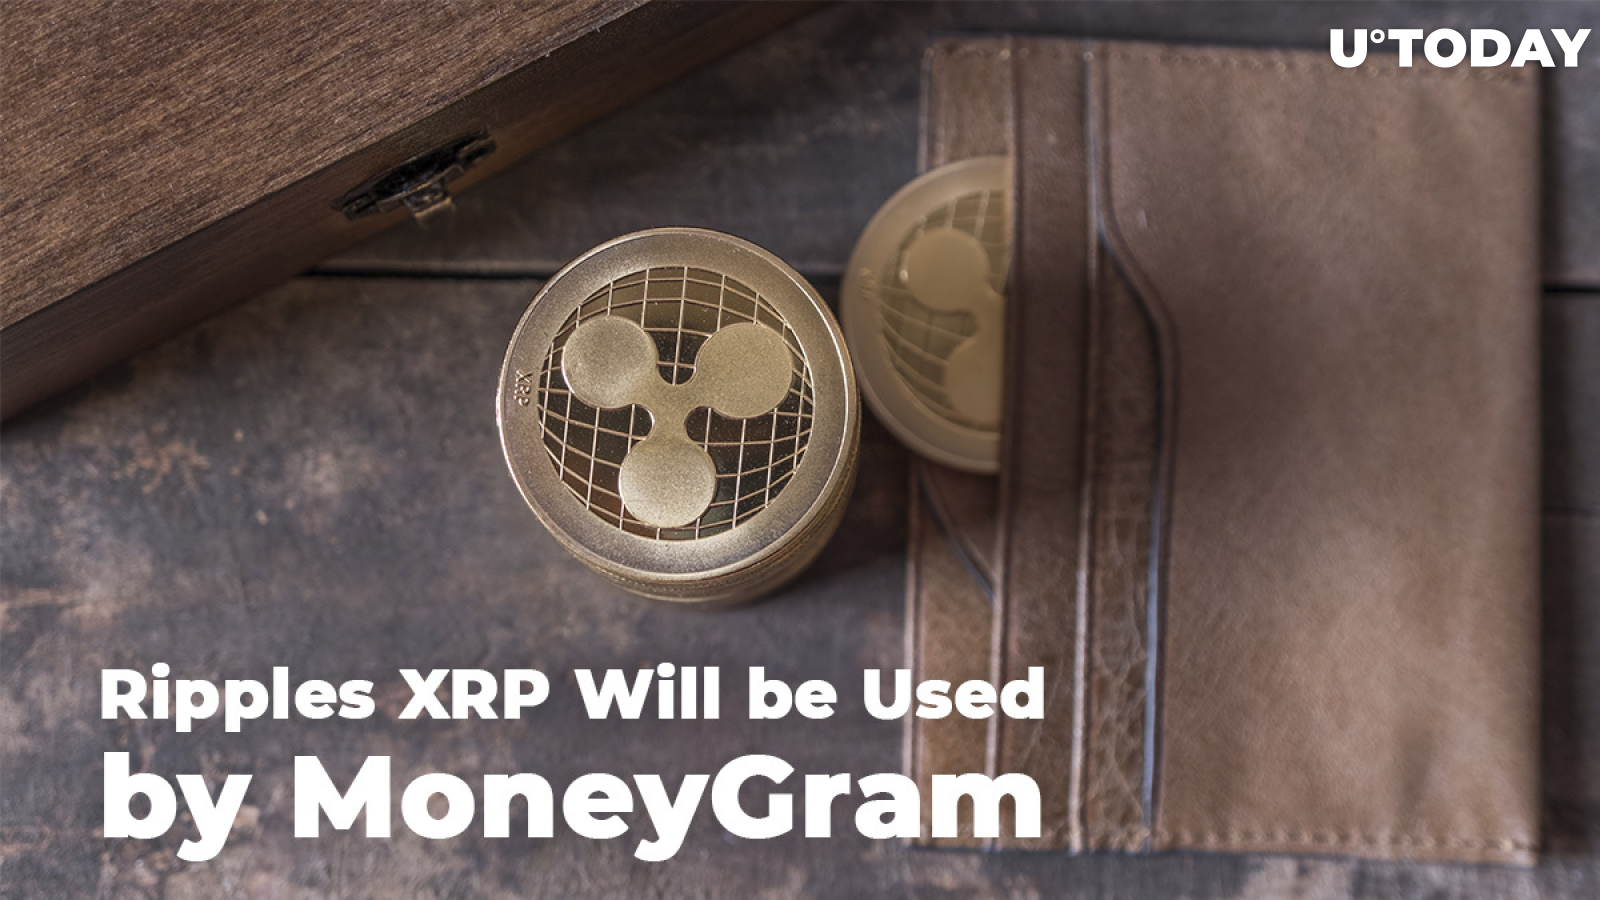 Ripple’s XRP Will Be Used by MoneyGram for Conducting Cross-Border Payments  